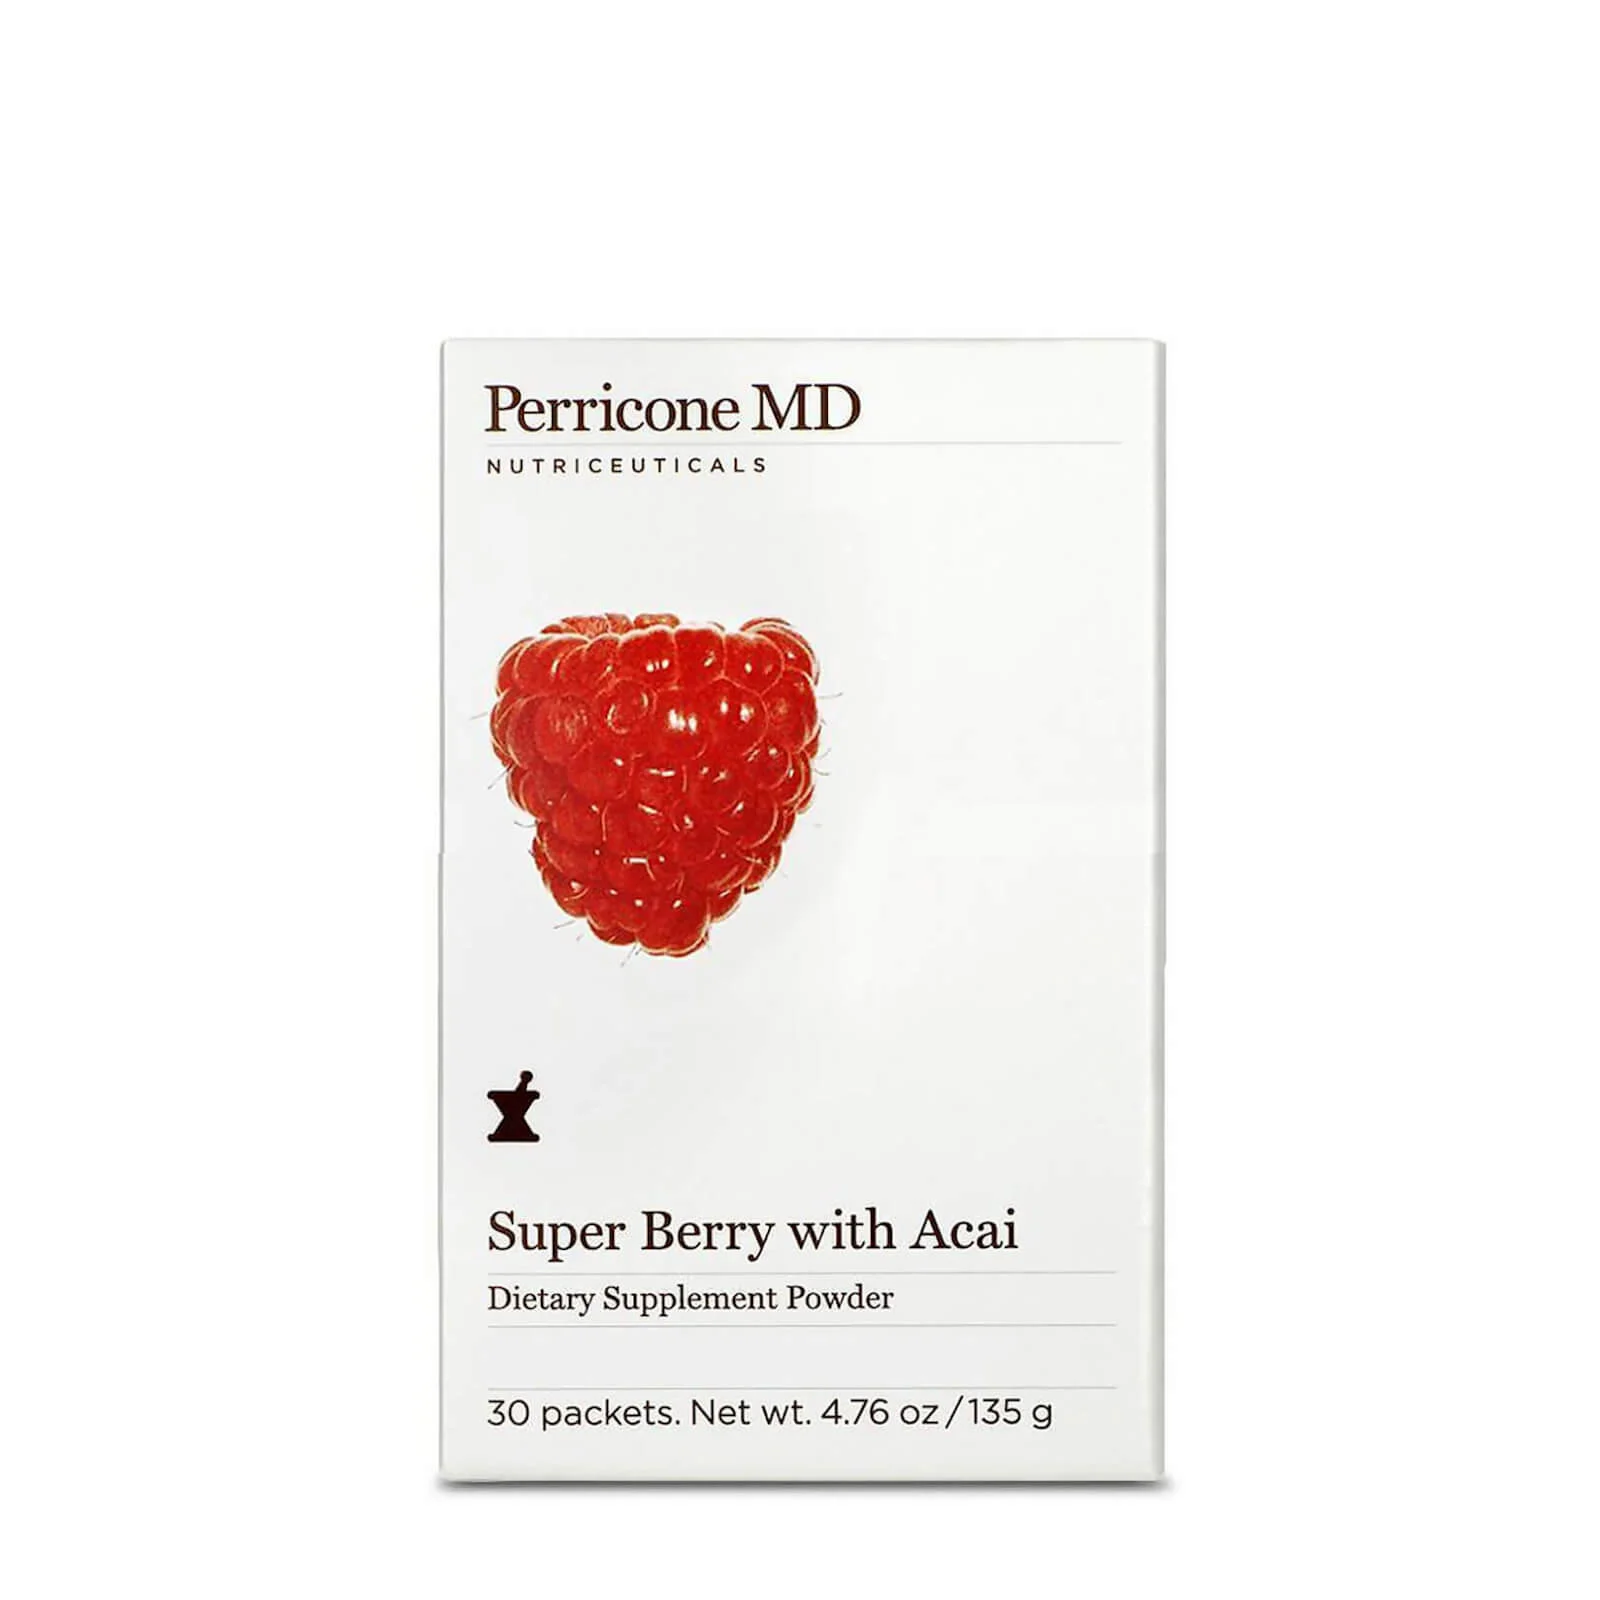 Perricone MD Super berry with Acai Supplements (30 Days) Image 1